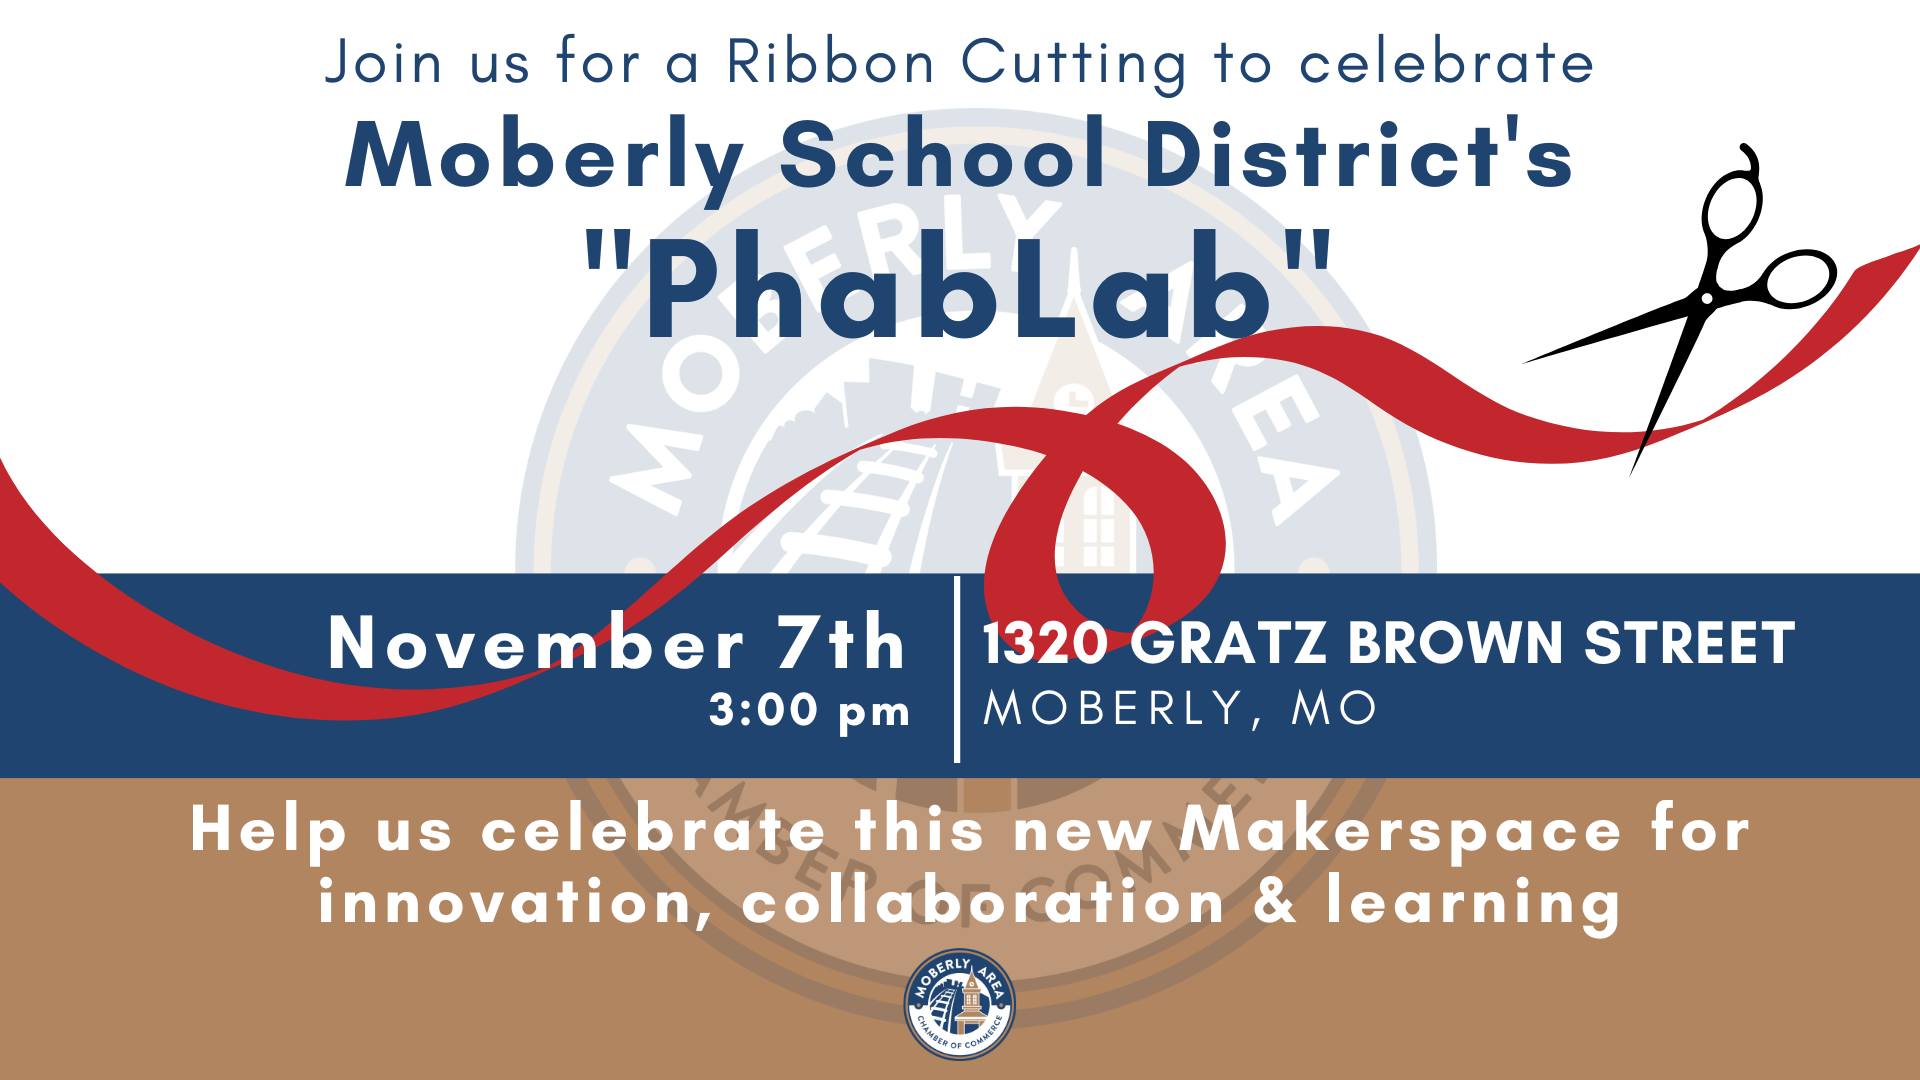 <h1 class="tribe-events-single-event-title">Moberly School District “PhabLab” Ribbon Cutting</h1>